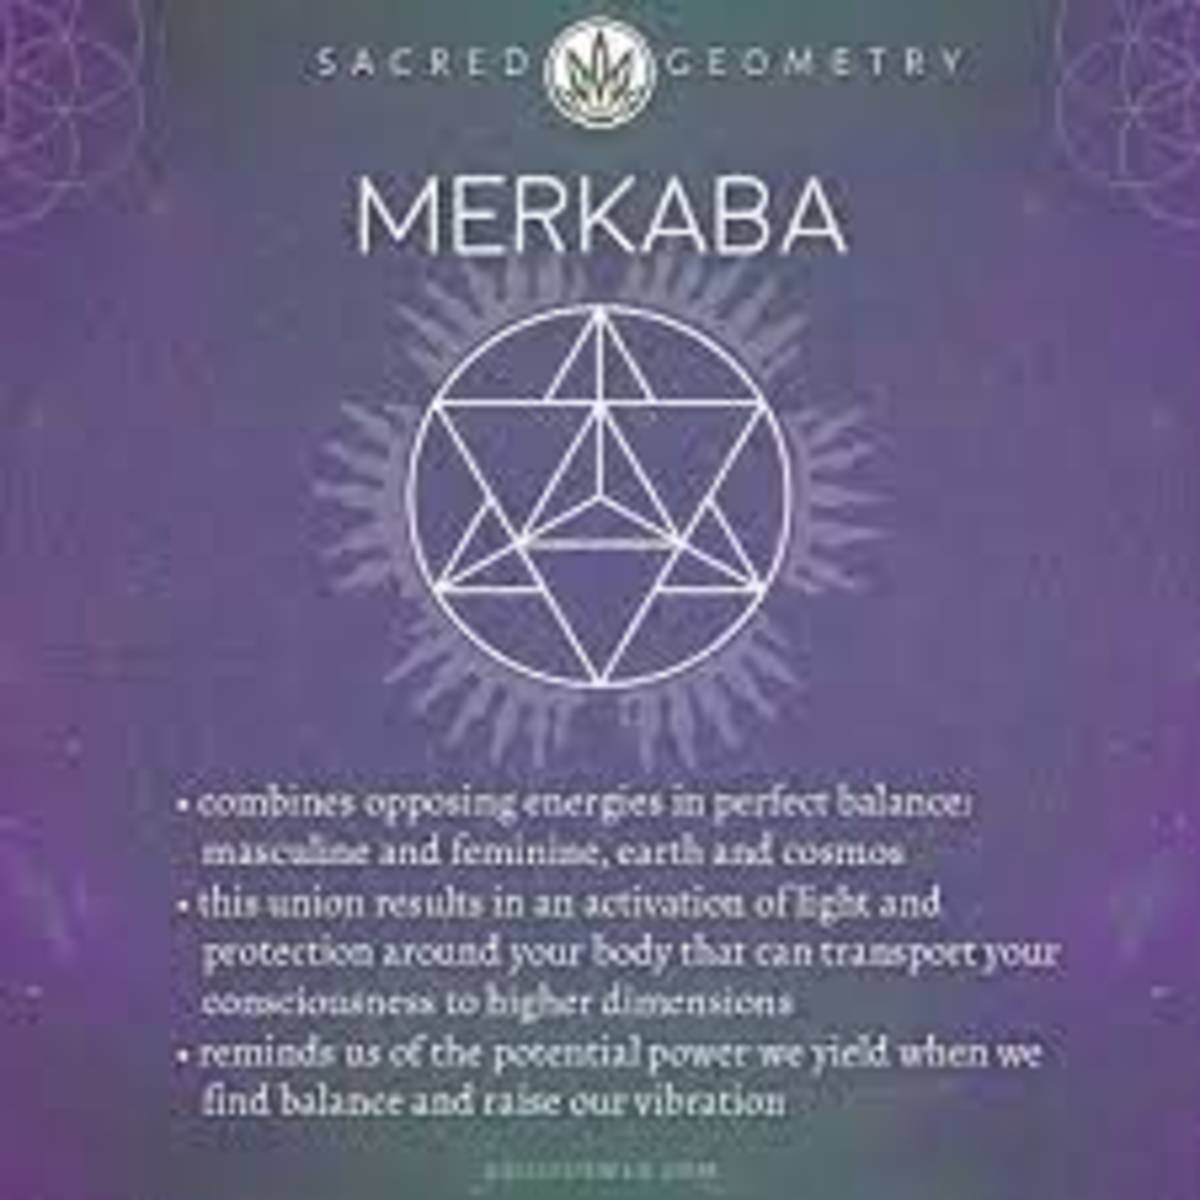 ascended-teachings-a-guide-to-merkabah-and-unlocking-the-divinity-within